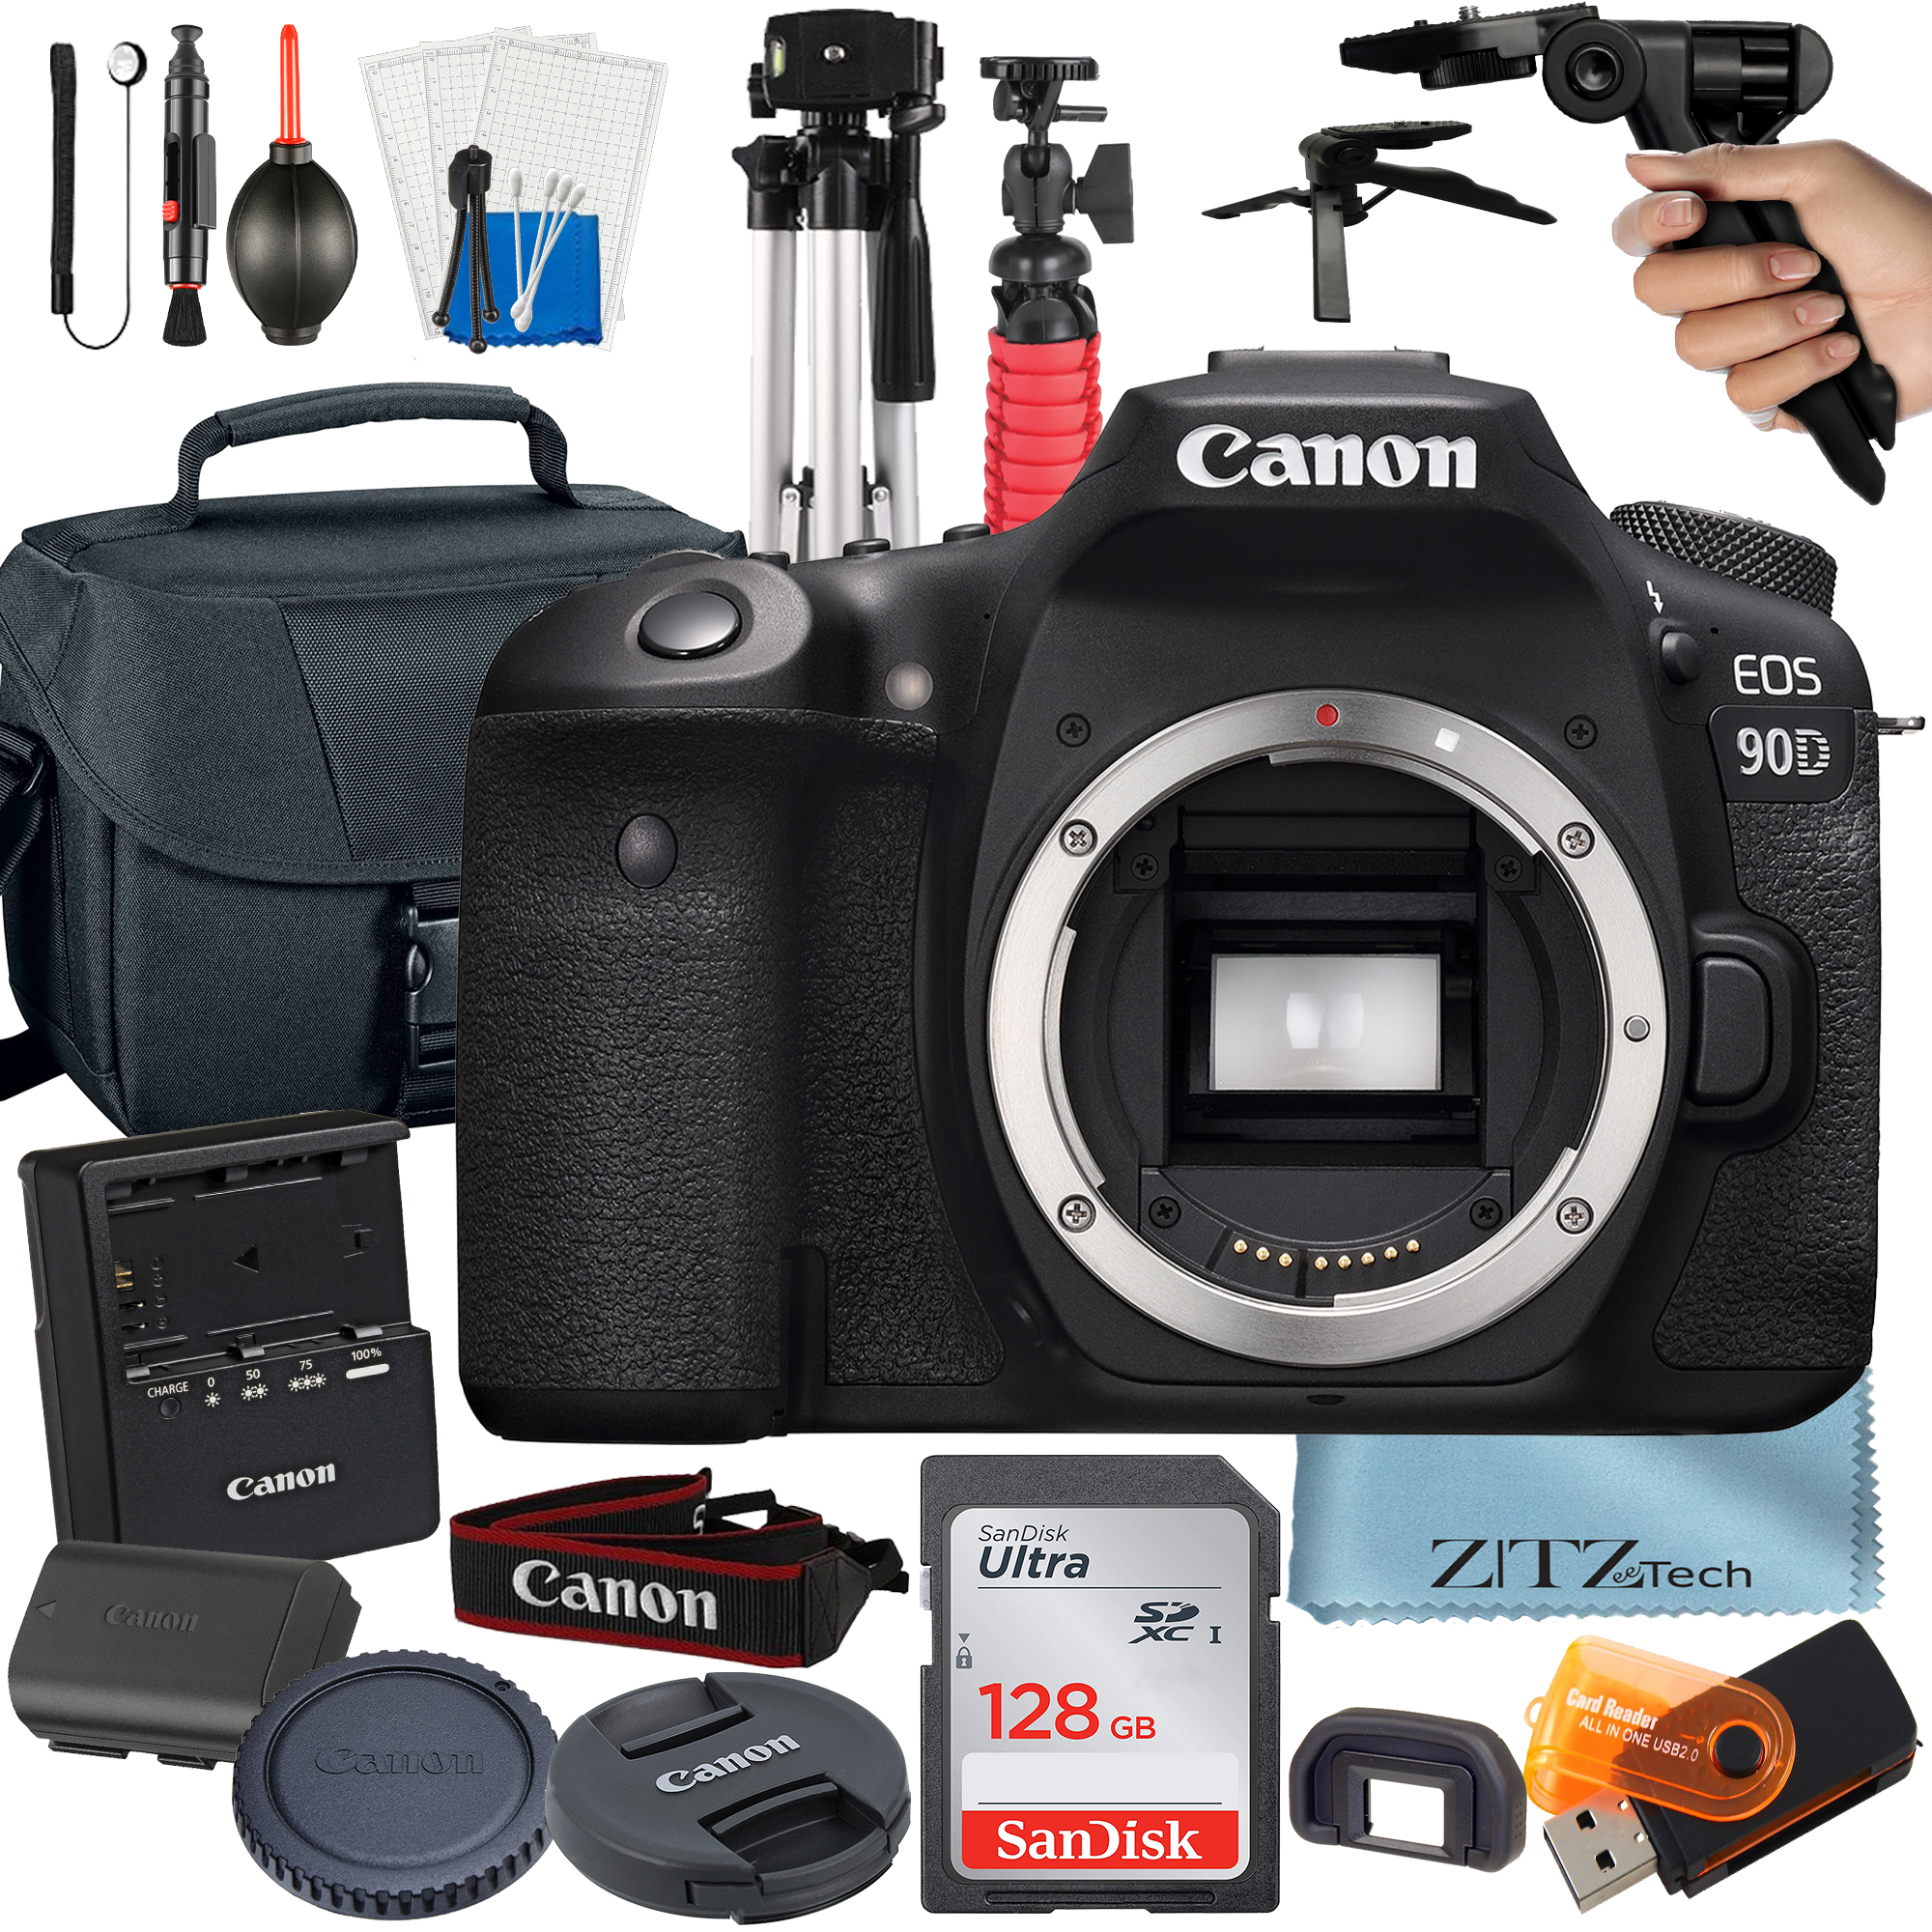 Canon EOS 90D DSLR Camera (Body Only) Bundle with 128GB SanDisk Card + Case + Tripod + ZeeTech Accessory